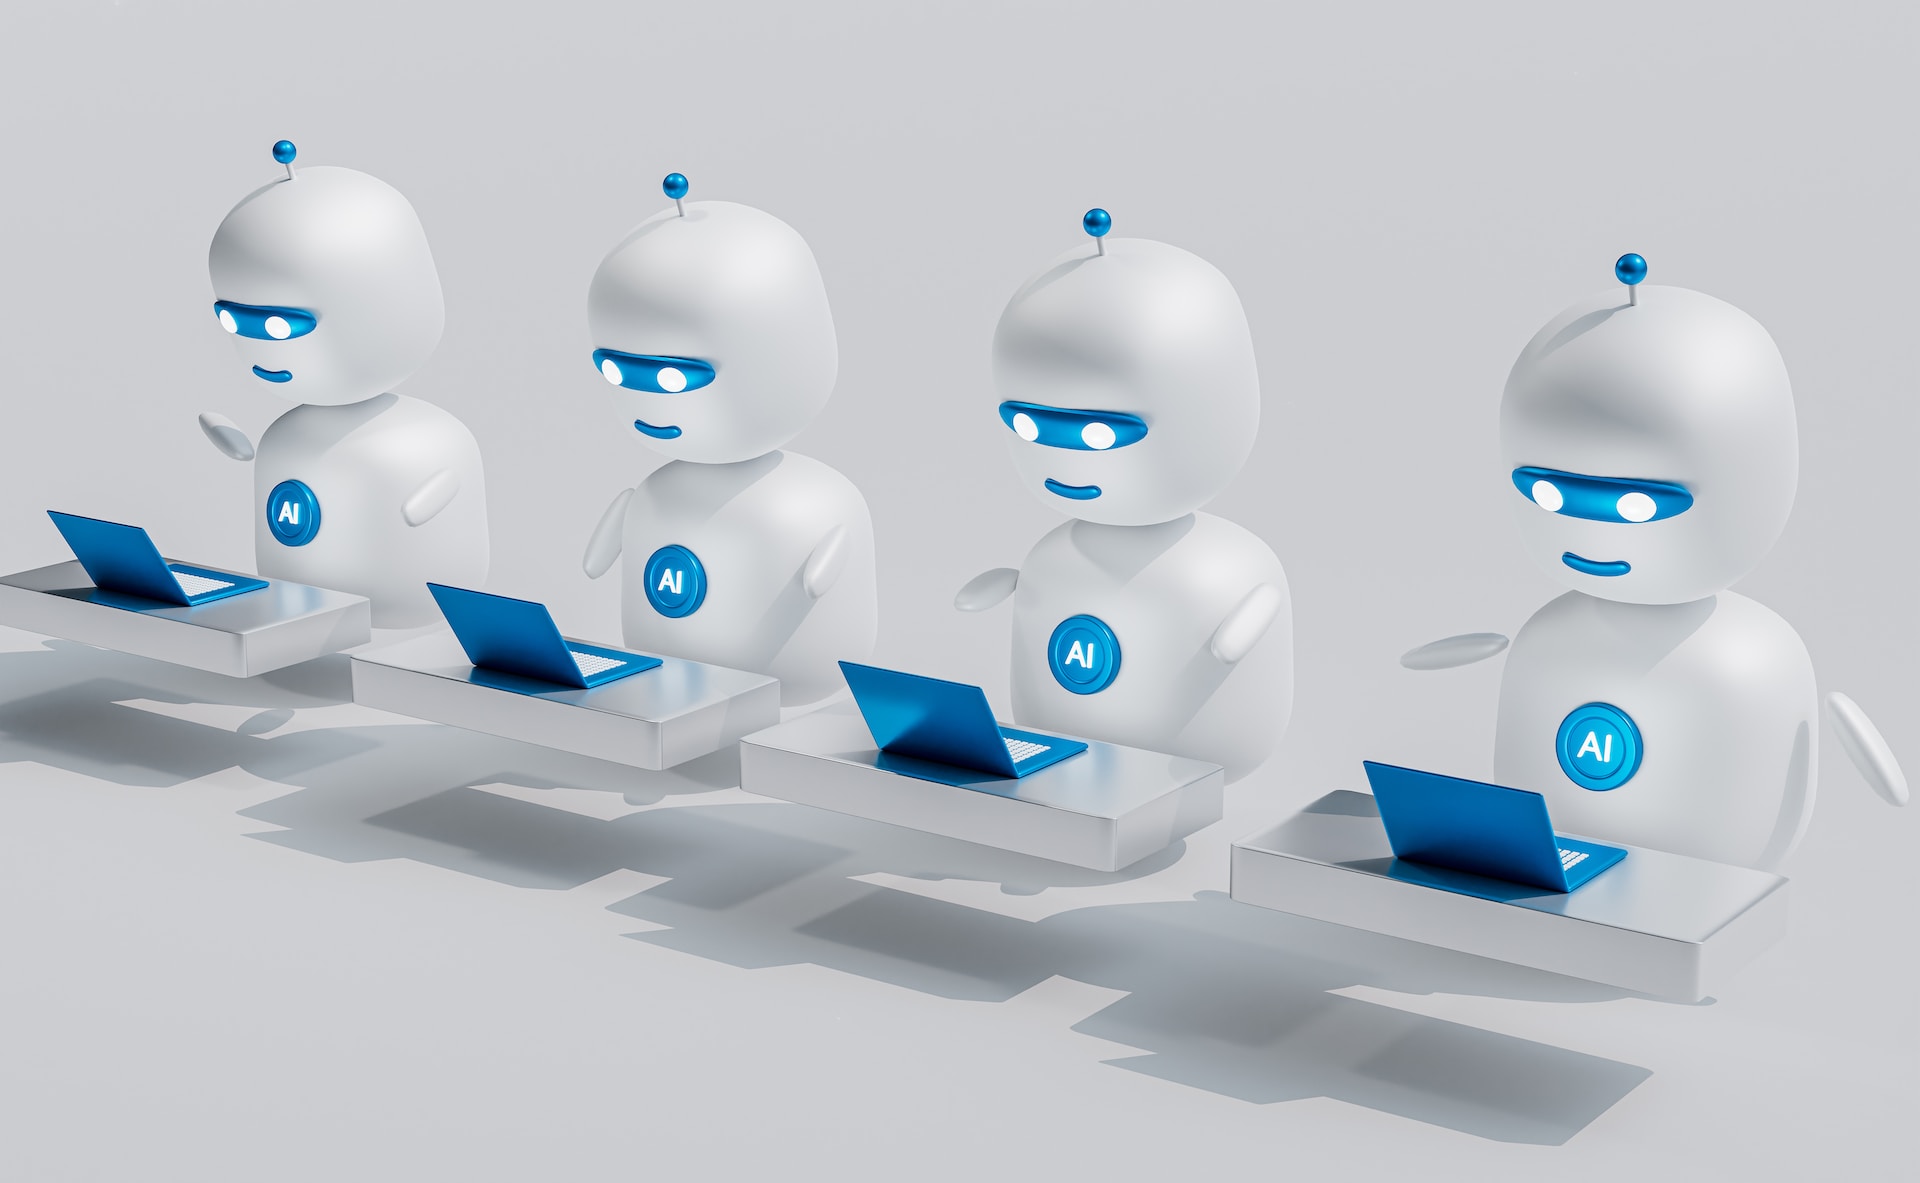 image of 4 robot/AI all holding laptops | Field Service